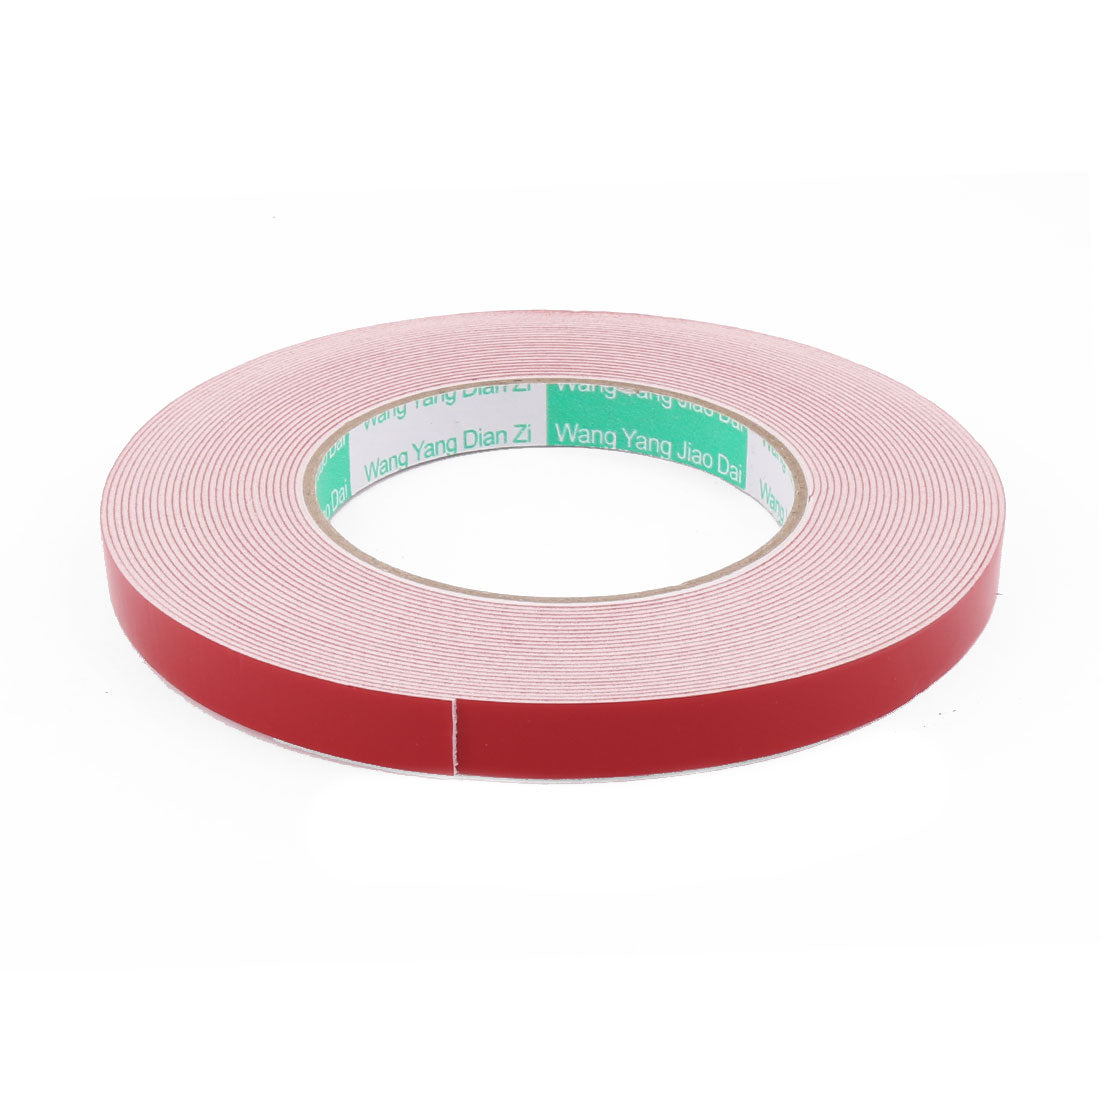 uxcell Uxcell 12MM Width 10M Length 1MM Thick White Dual Sided Waterproof Sponge Tape for Car